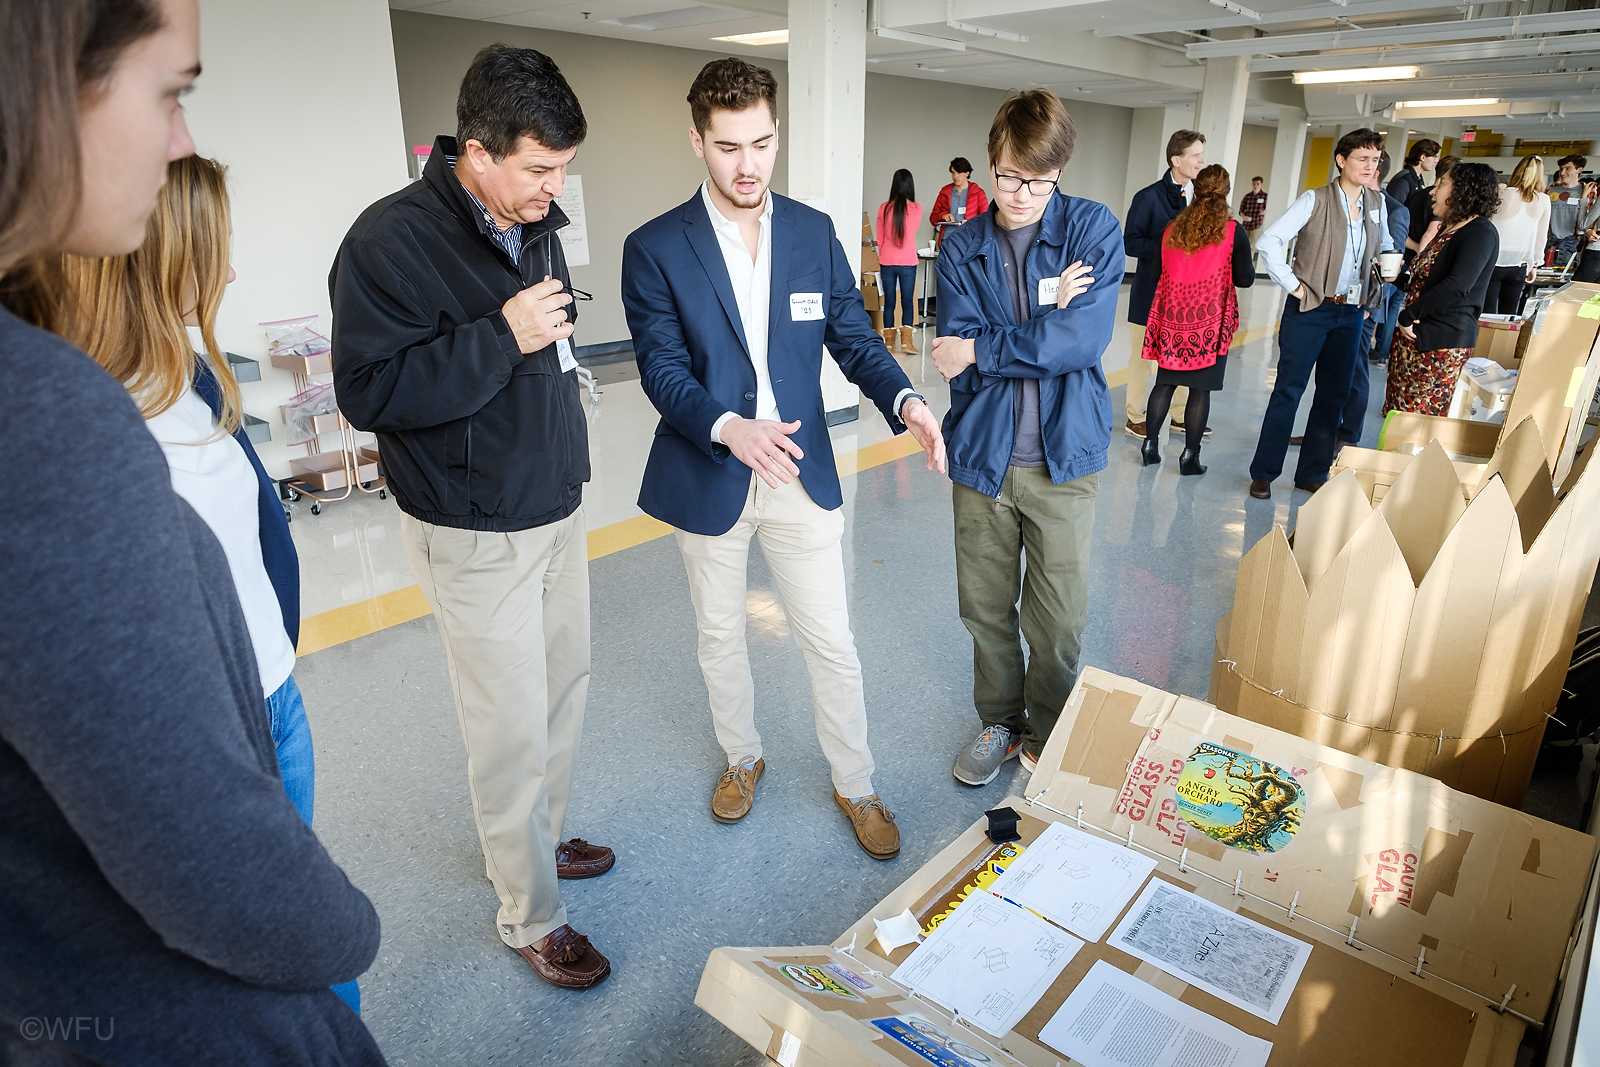 Wake Forest students in Engineering 111 hold a Project Expo to display their work during the semester, including chairs made from cardboard, at Wake Downtown, on Tuesday, December 12, 2017. Garrett Odell (21) talks about his project with Richard Eskridge from Duke Energy.